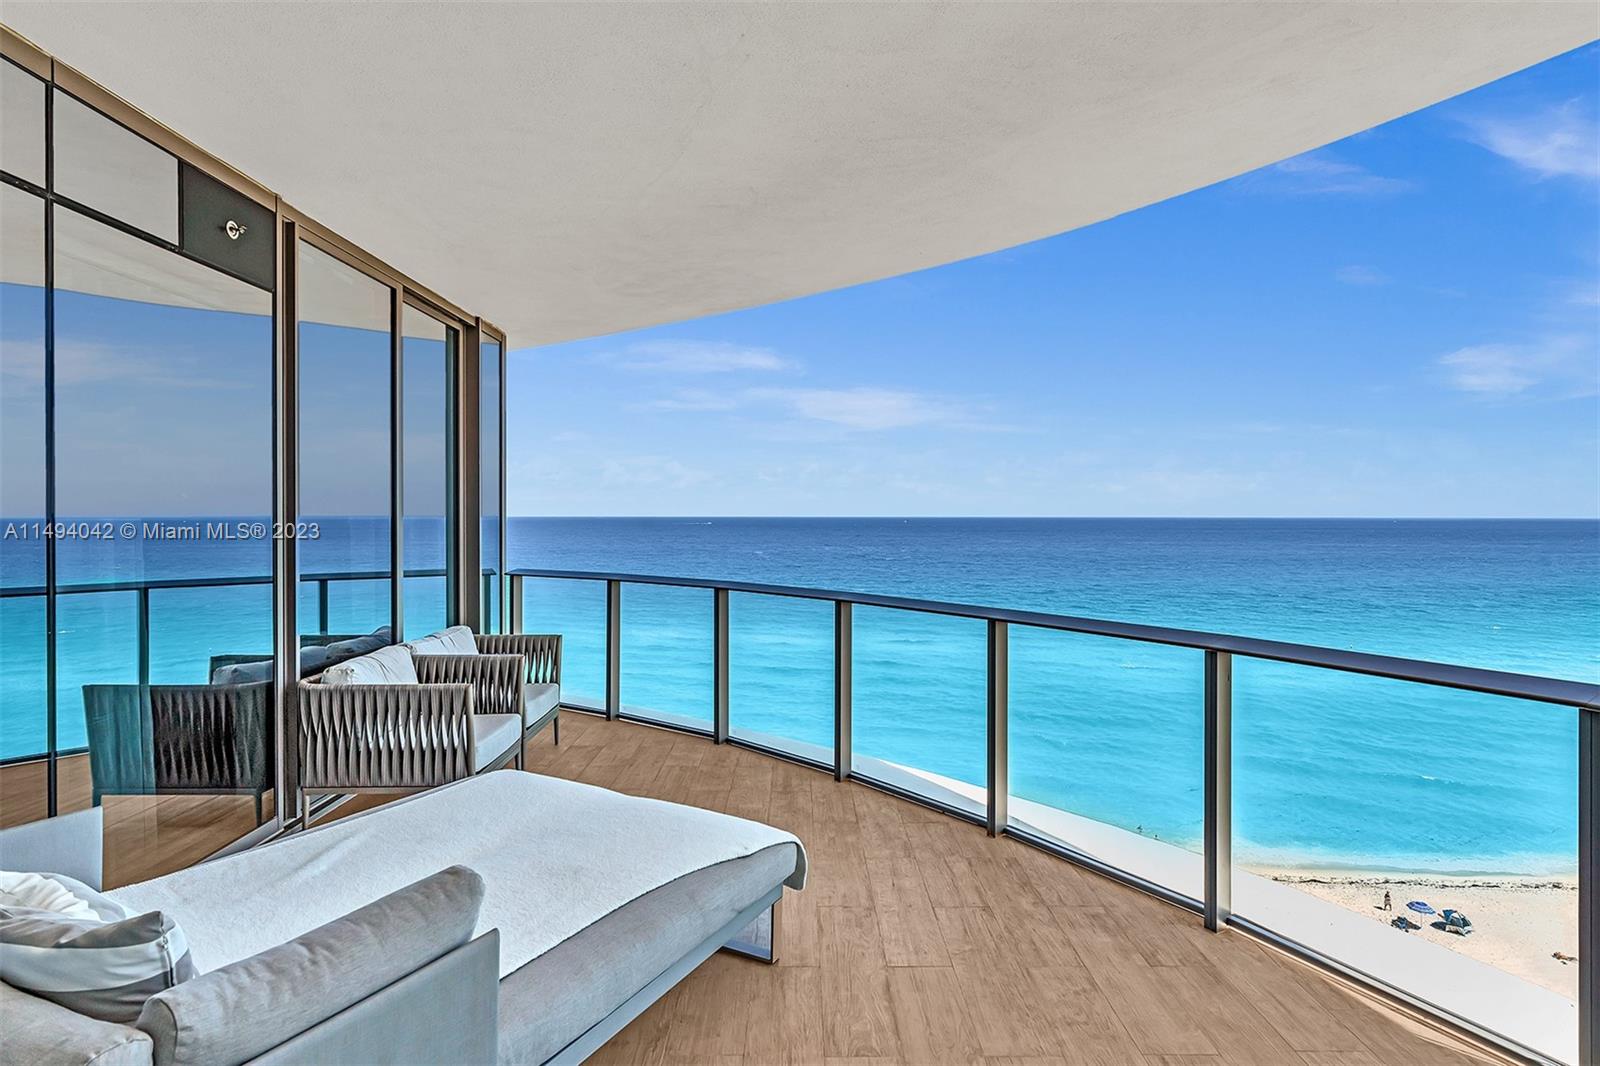 ~300° unobstructed
views including the Atlantic Ocean, Intracoastal, Bay, and Miami Skyline. the Perfect Floor to See, Hear, Feel and Smell the Beautiful Perfect Beach and Ocean.  This is the largest Layout in the building with
Beautiful Panoramic views of the ocean, Bay, and Skyline from ALL balconies & Floor to Ceiling Windows throughout the Unit! Private Elevator fully furnished. Full Beach Service with two pools, restaurant, gym, spa, Pilates, sauna, and much more. Once in a lifetime opportunity. No expenses Spared. Must See.  This unit is priced BELOW market value for quick sale.  Owner has home and businesses out of state.